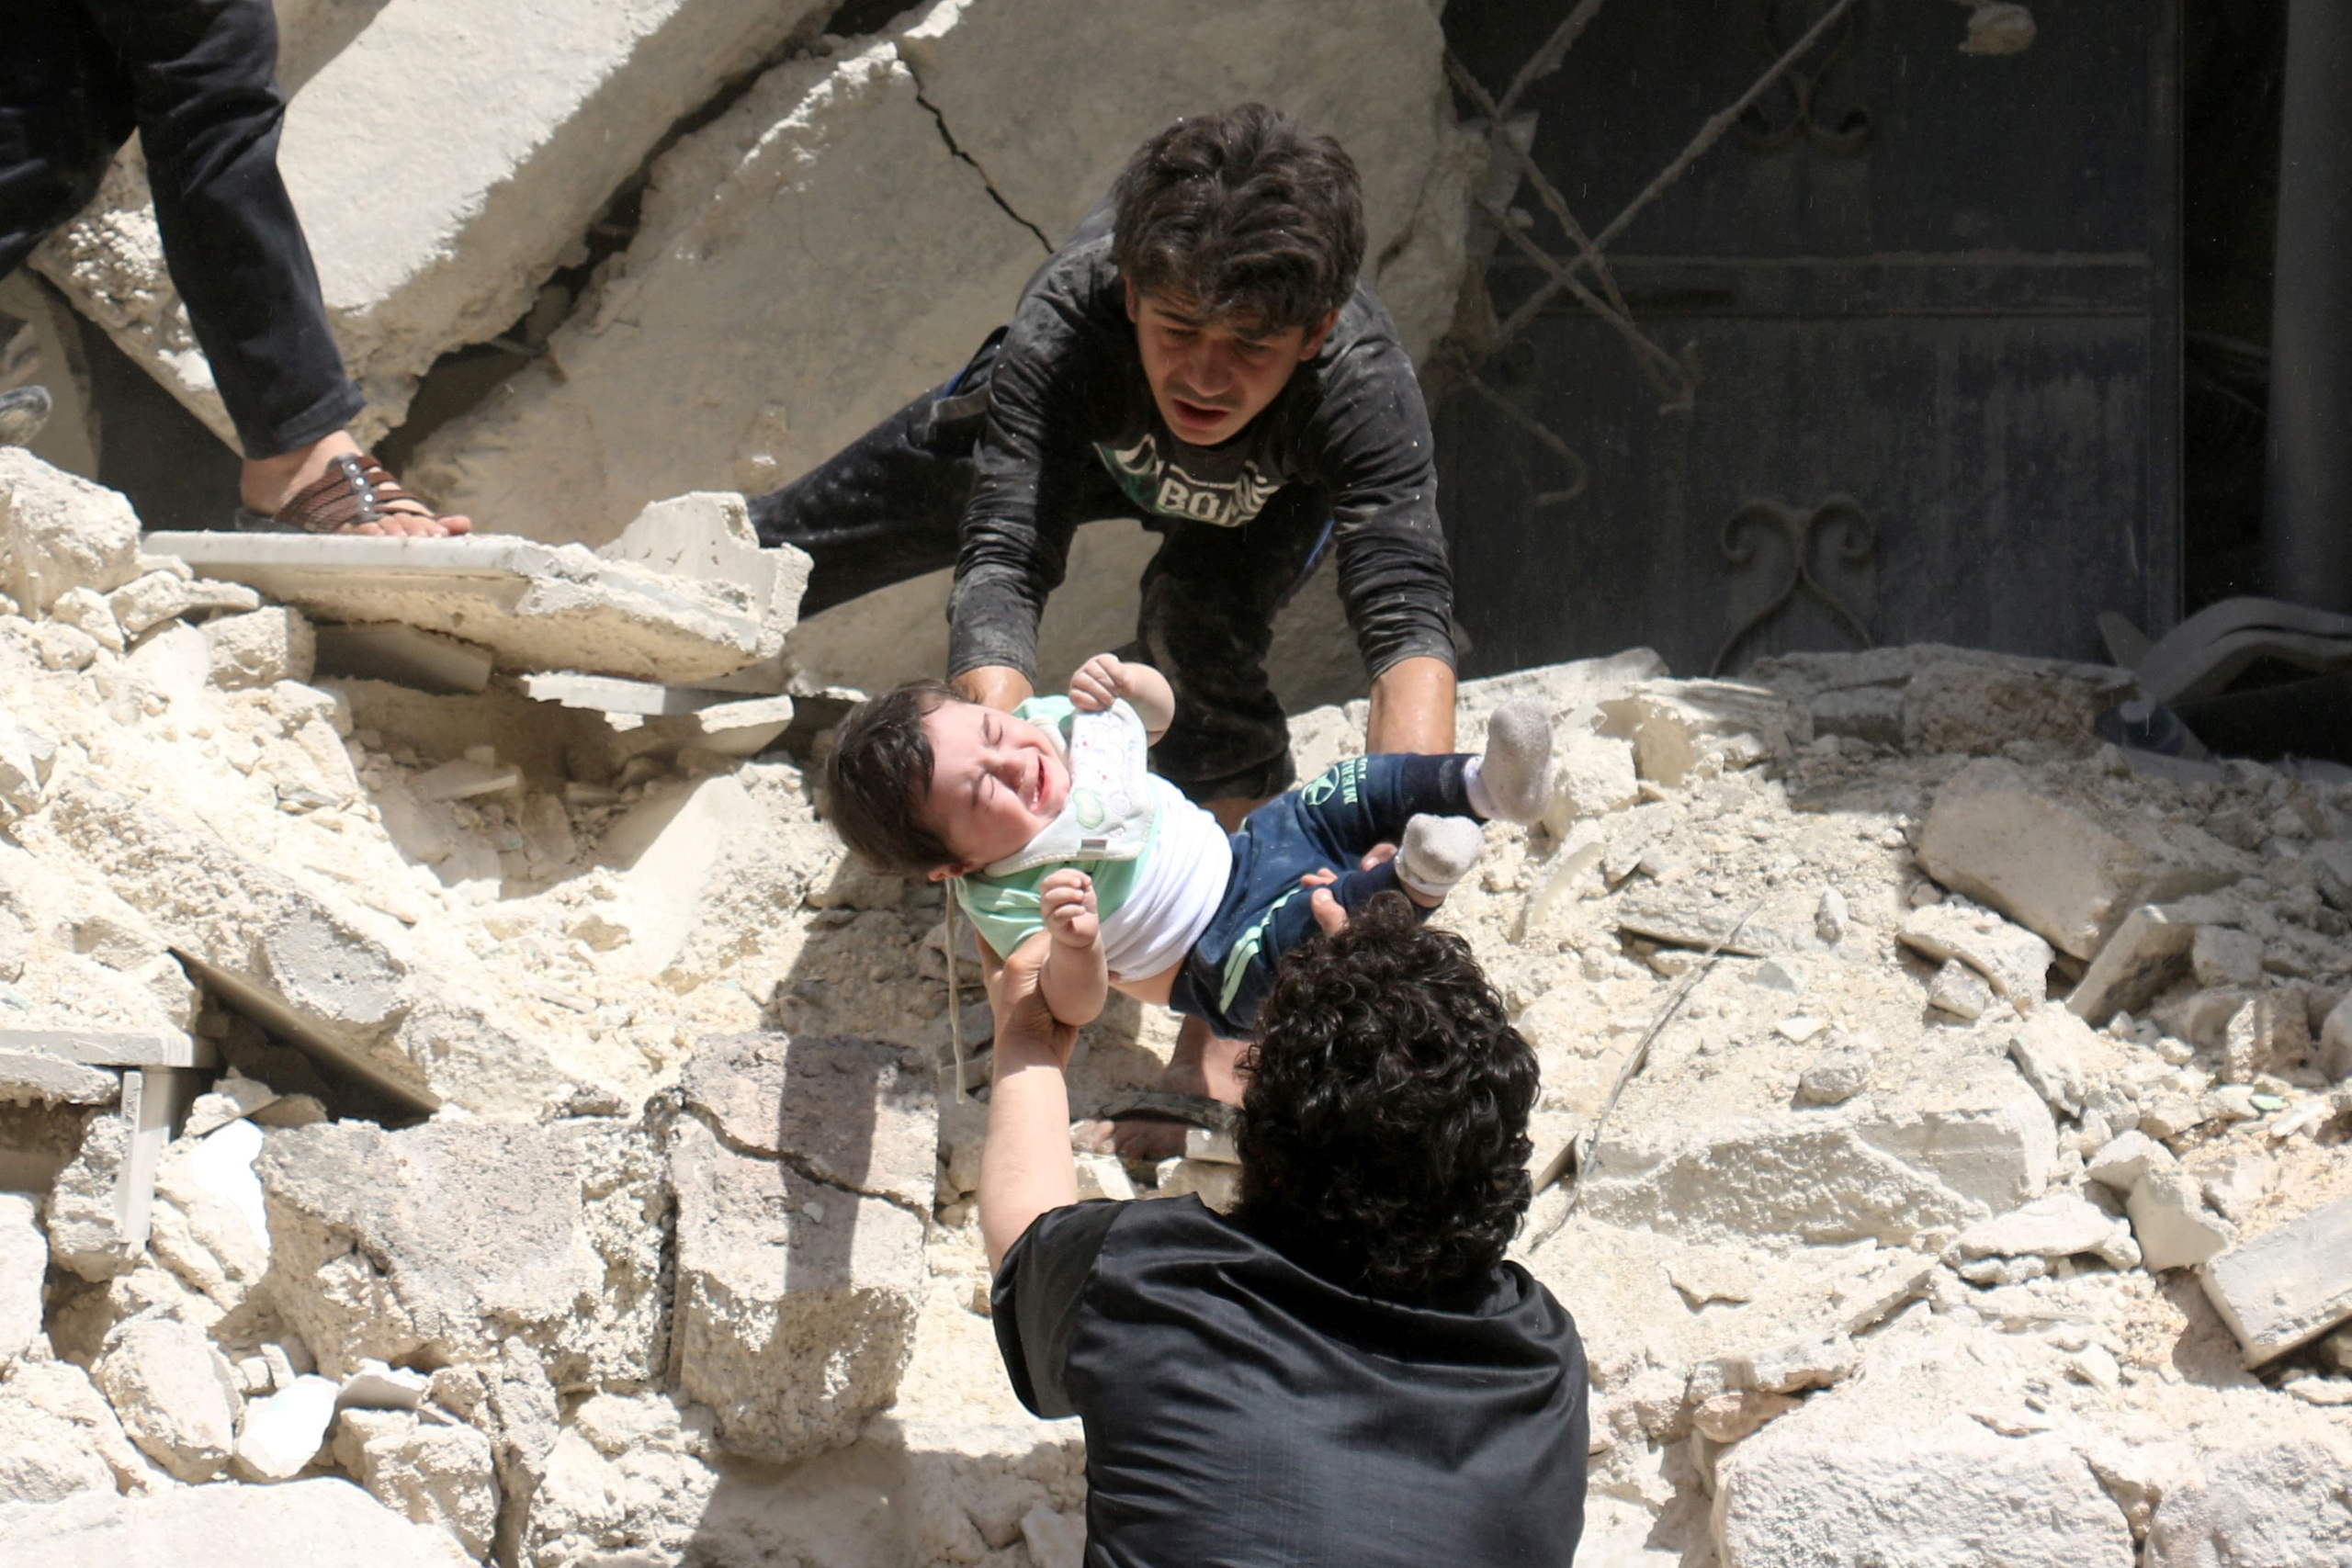 The toddler is passed to another man on the ground (Ameer Alhalbi—AFP/Getty Images)